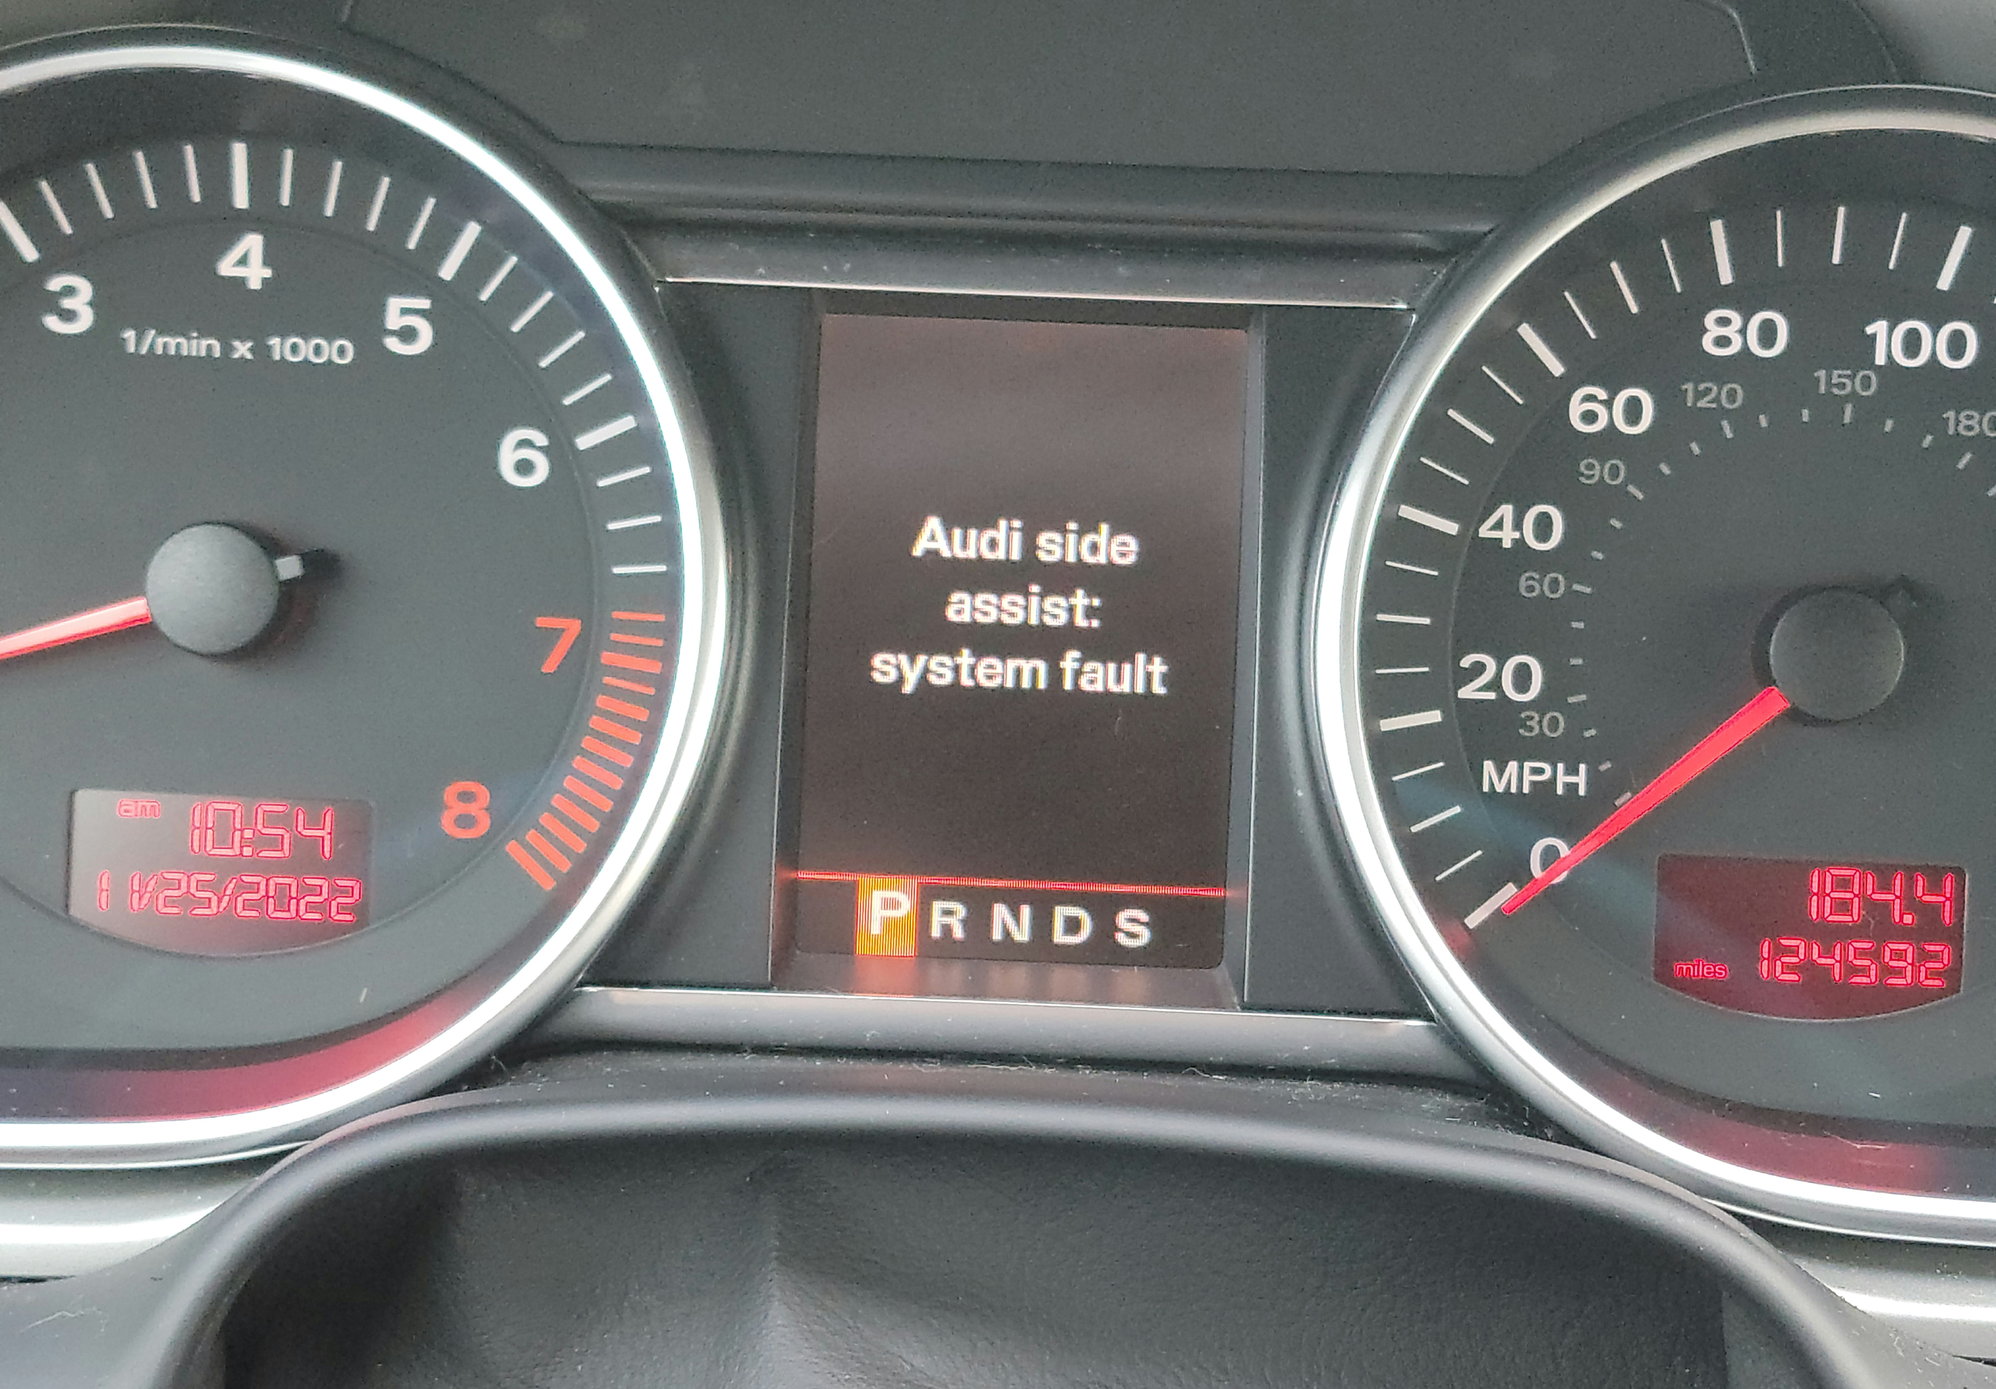 How to Fix Audi Side Assist System Fault Quickly & Effectively